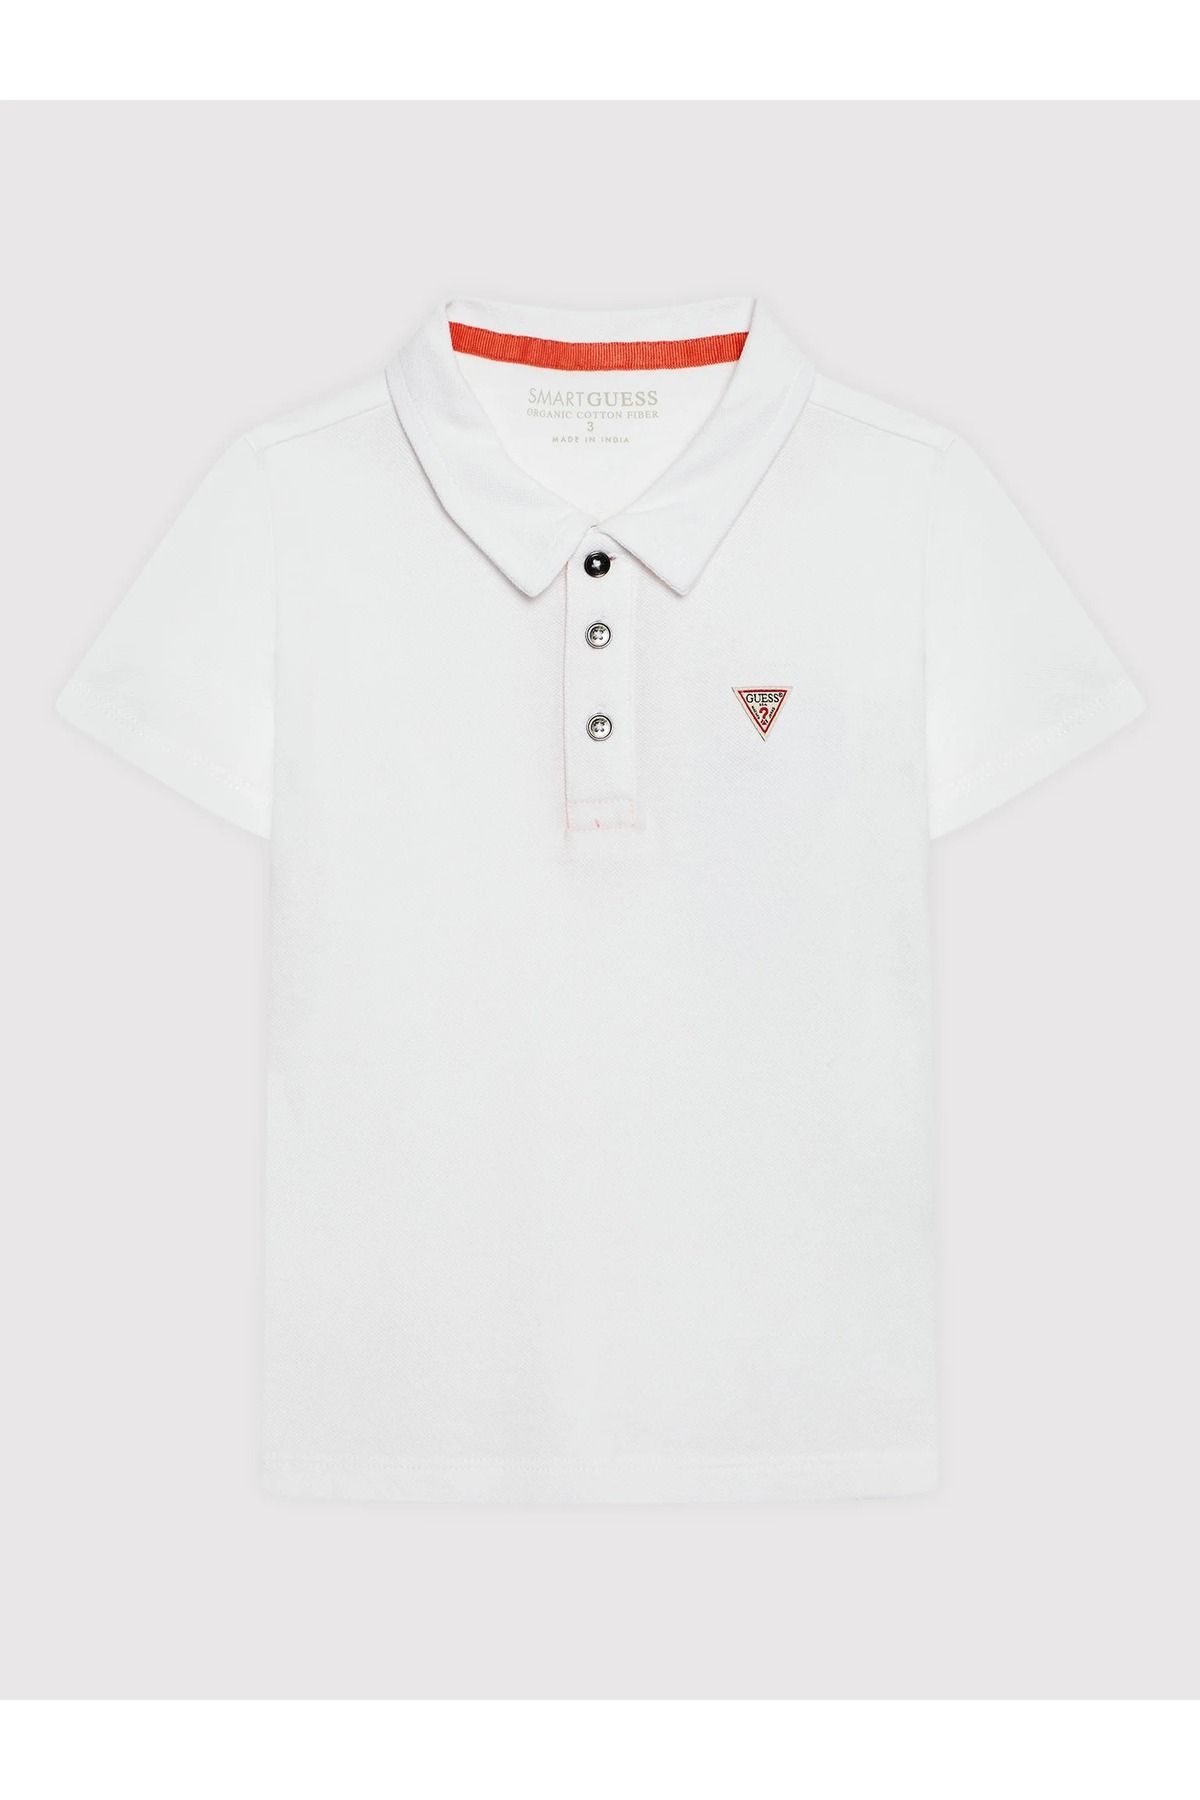 Guess SS POLO T-SHIRT